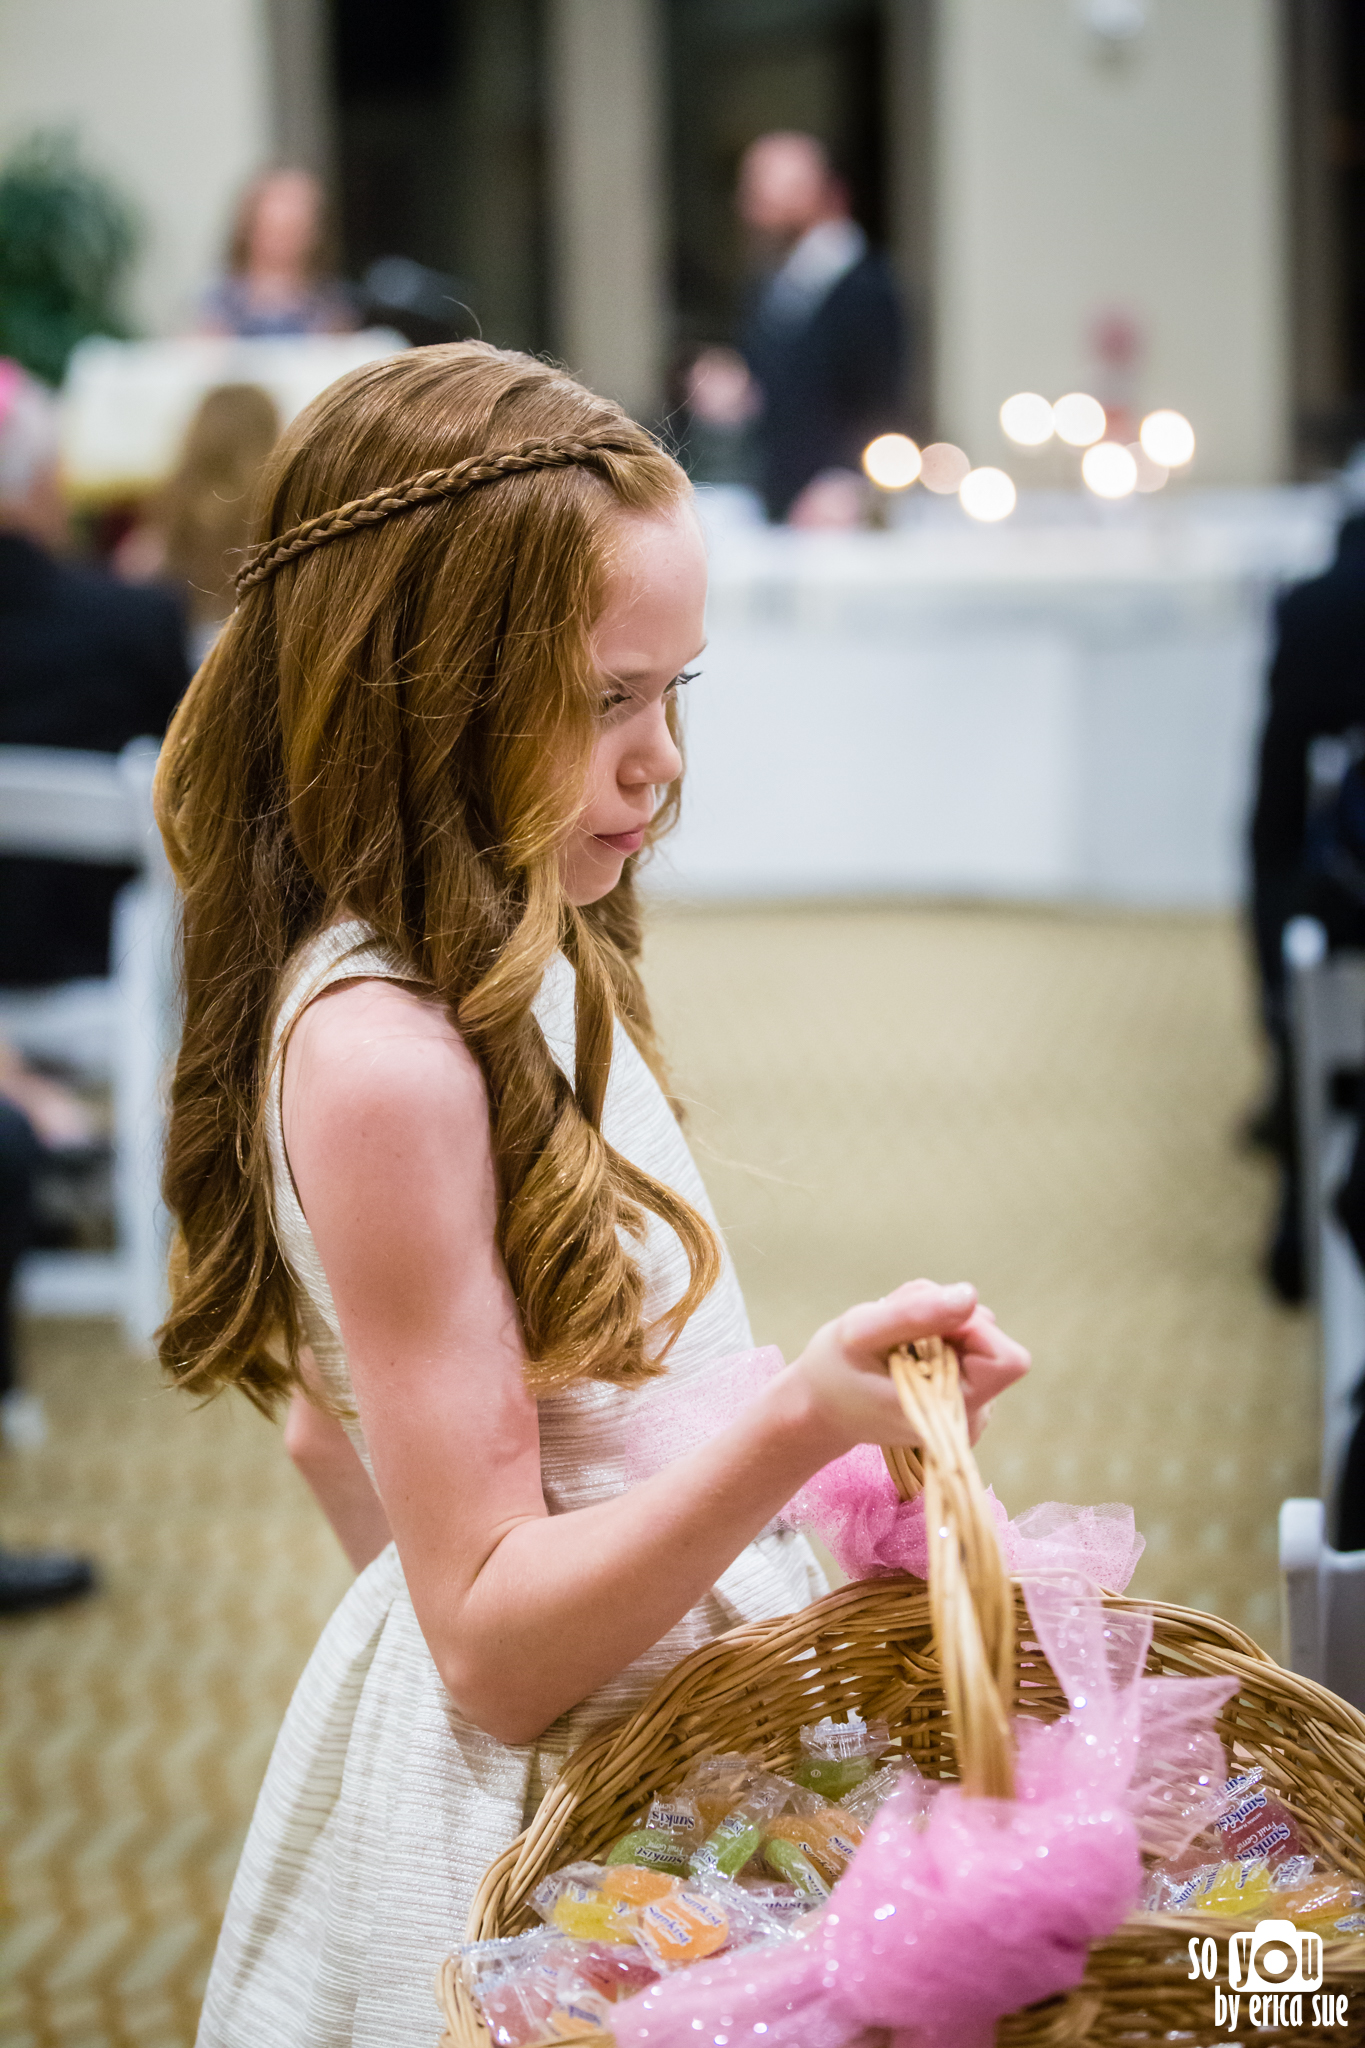 parkland-fl-mitzvah-photography-so-you-by-erica-sue-9972.jpg